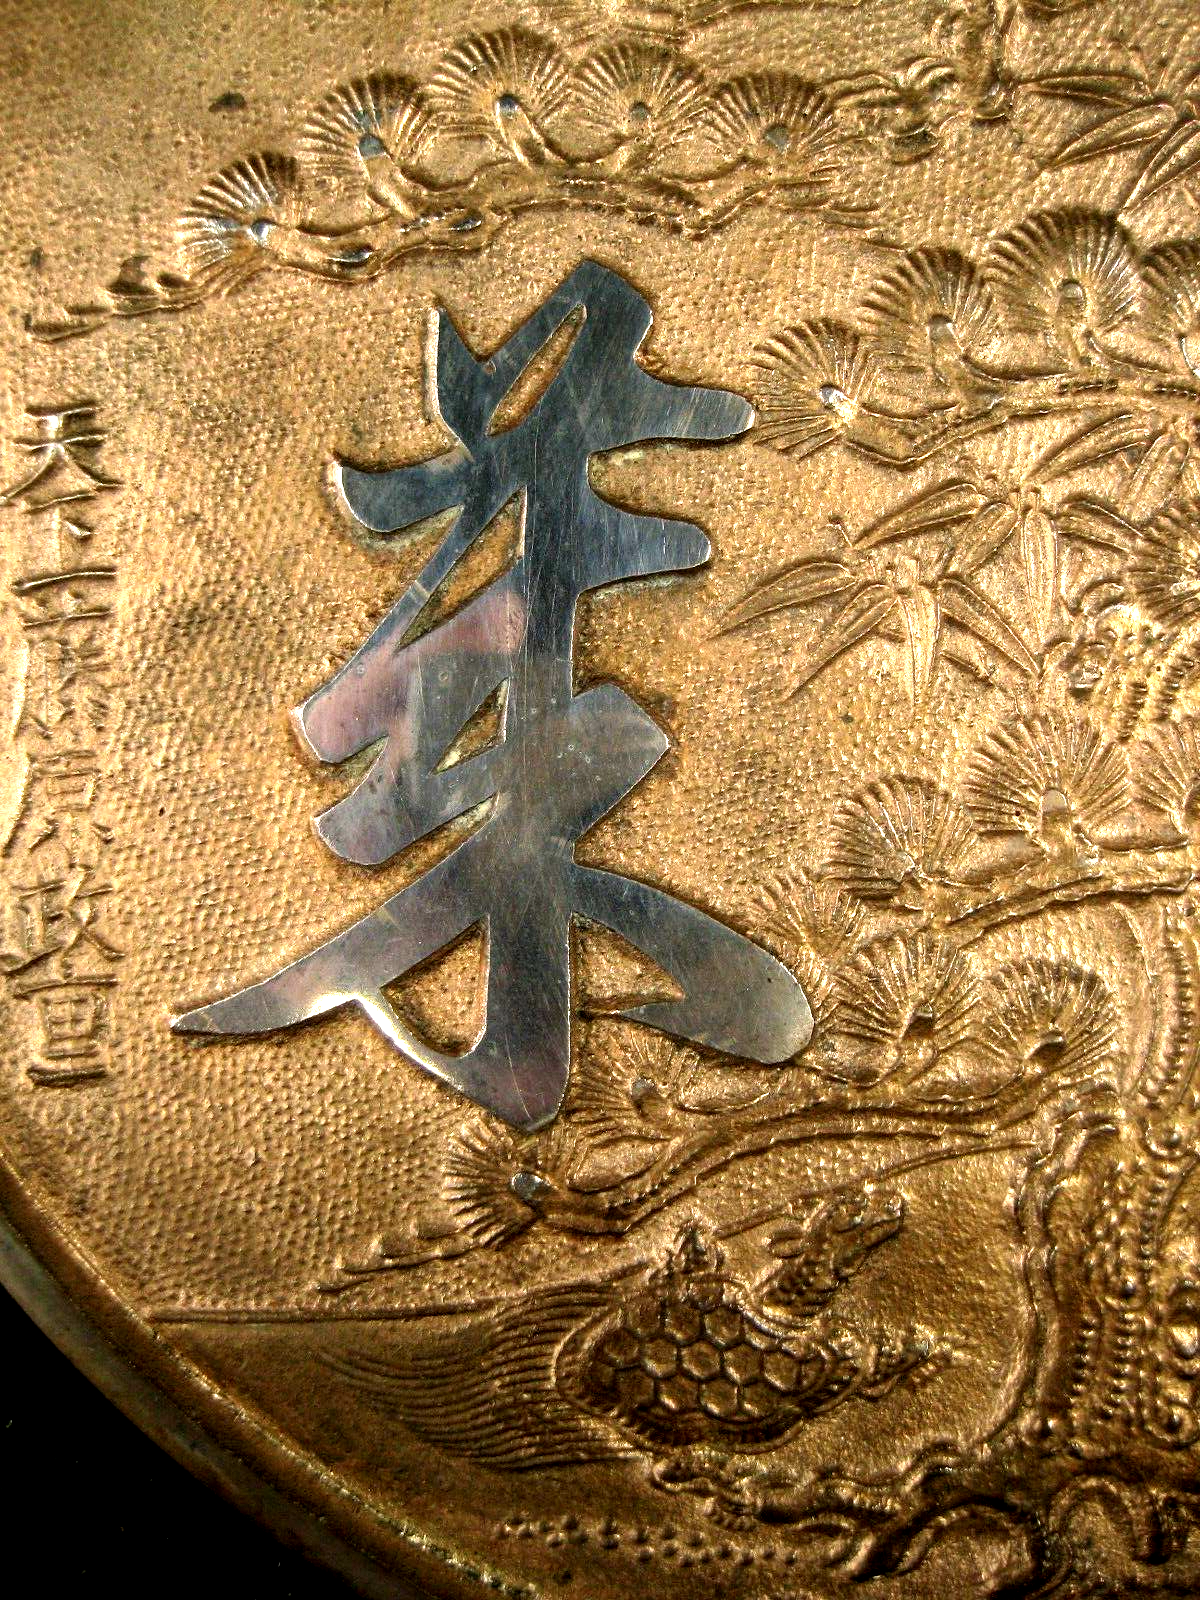 Antique Japanese Copper Signed Hand Mirror W/ Pine, Turtle, Kanji & Cranes 8"